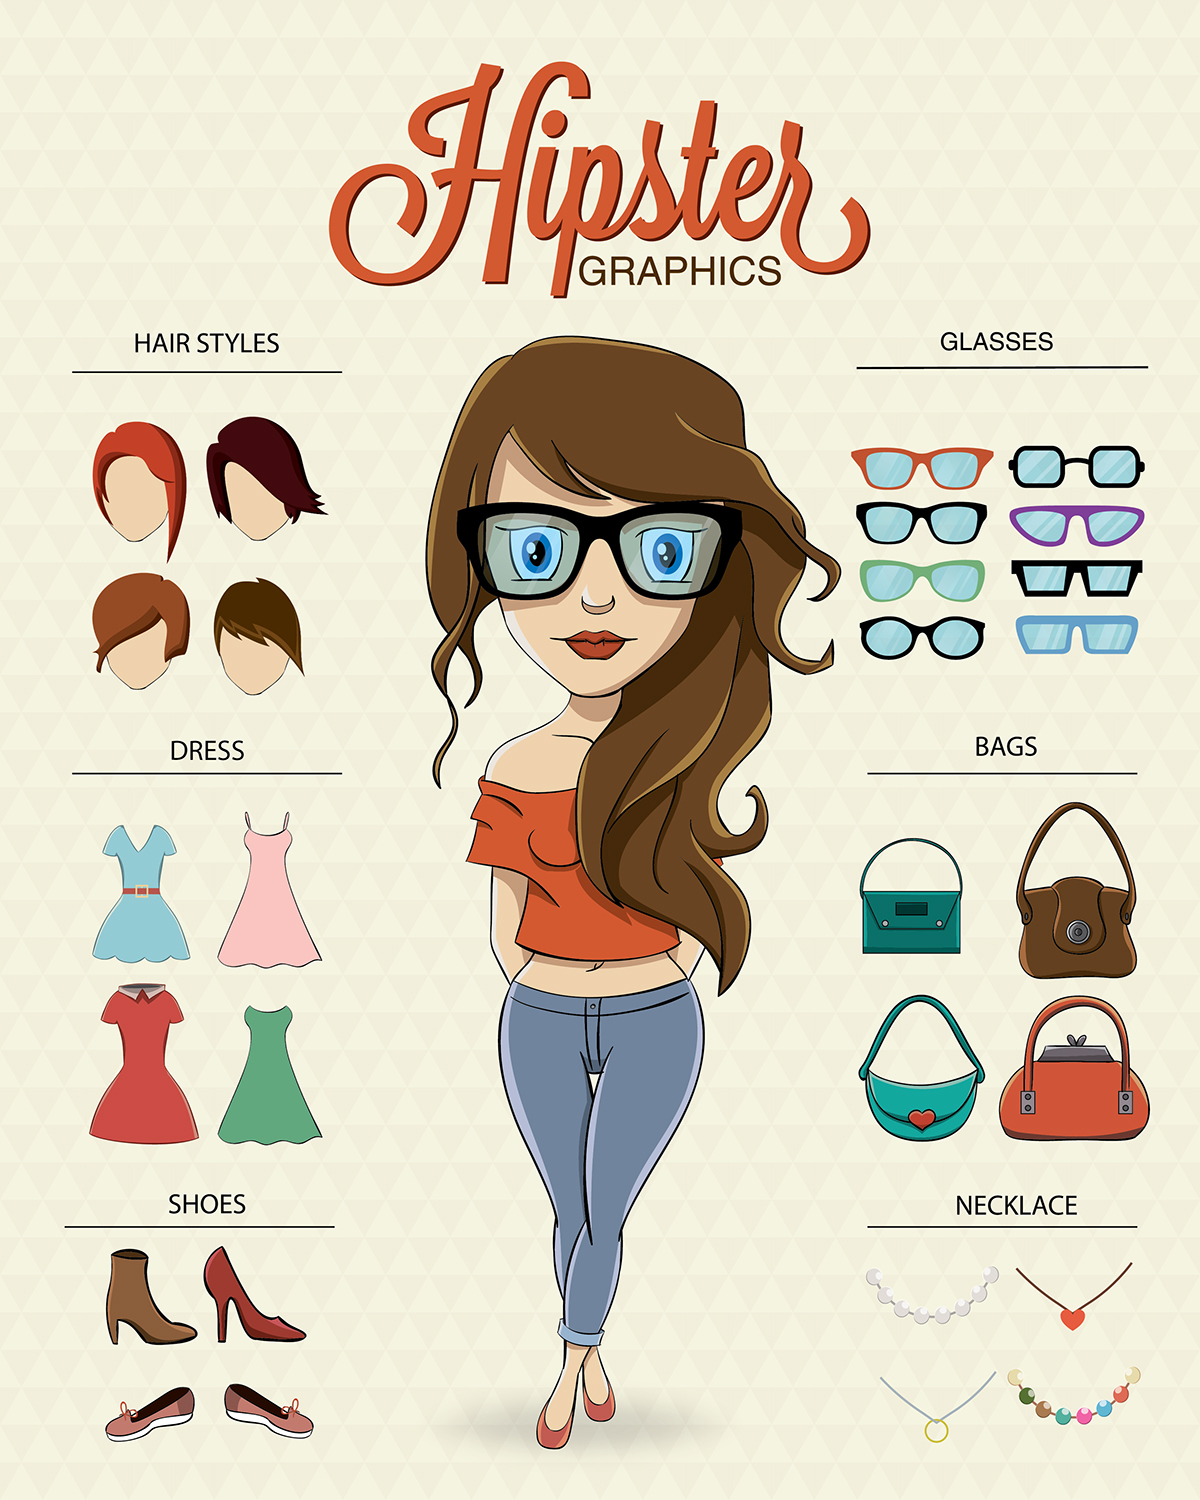 Hipster Icon Urban vector design glasses old guitar beard Young Retro tie information Clothing girl